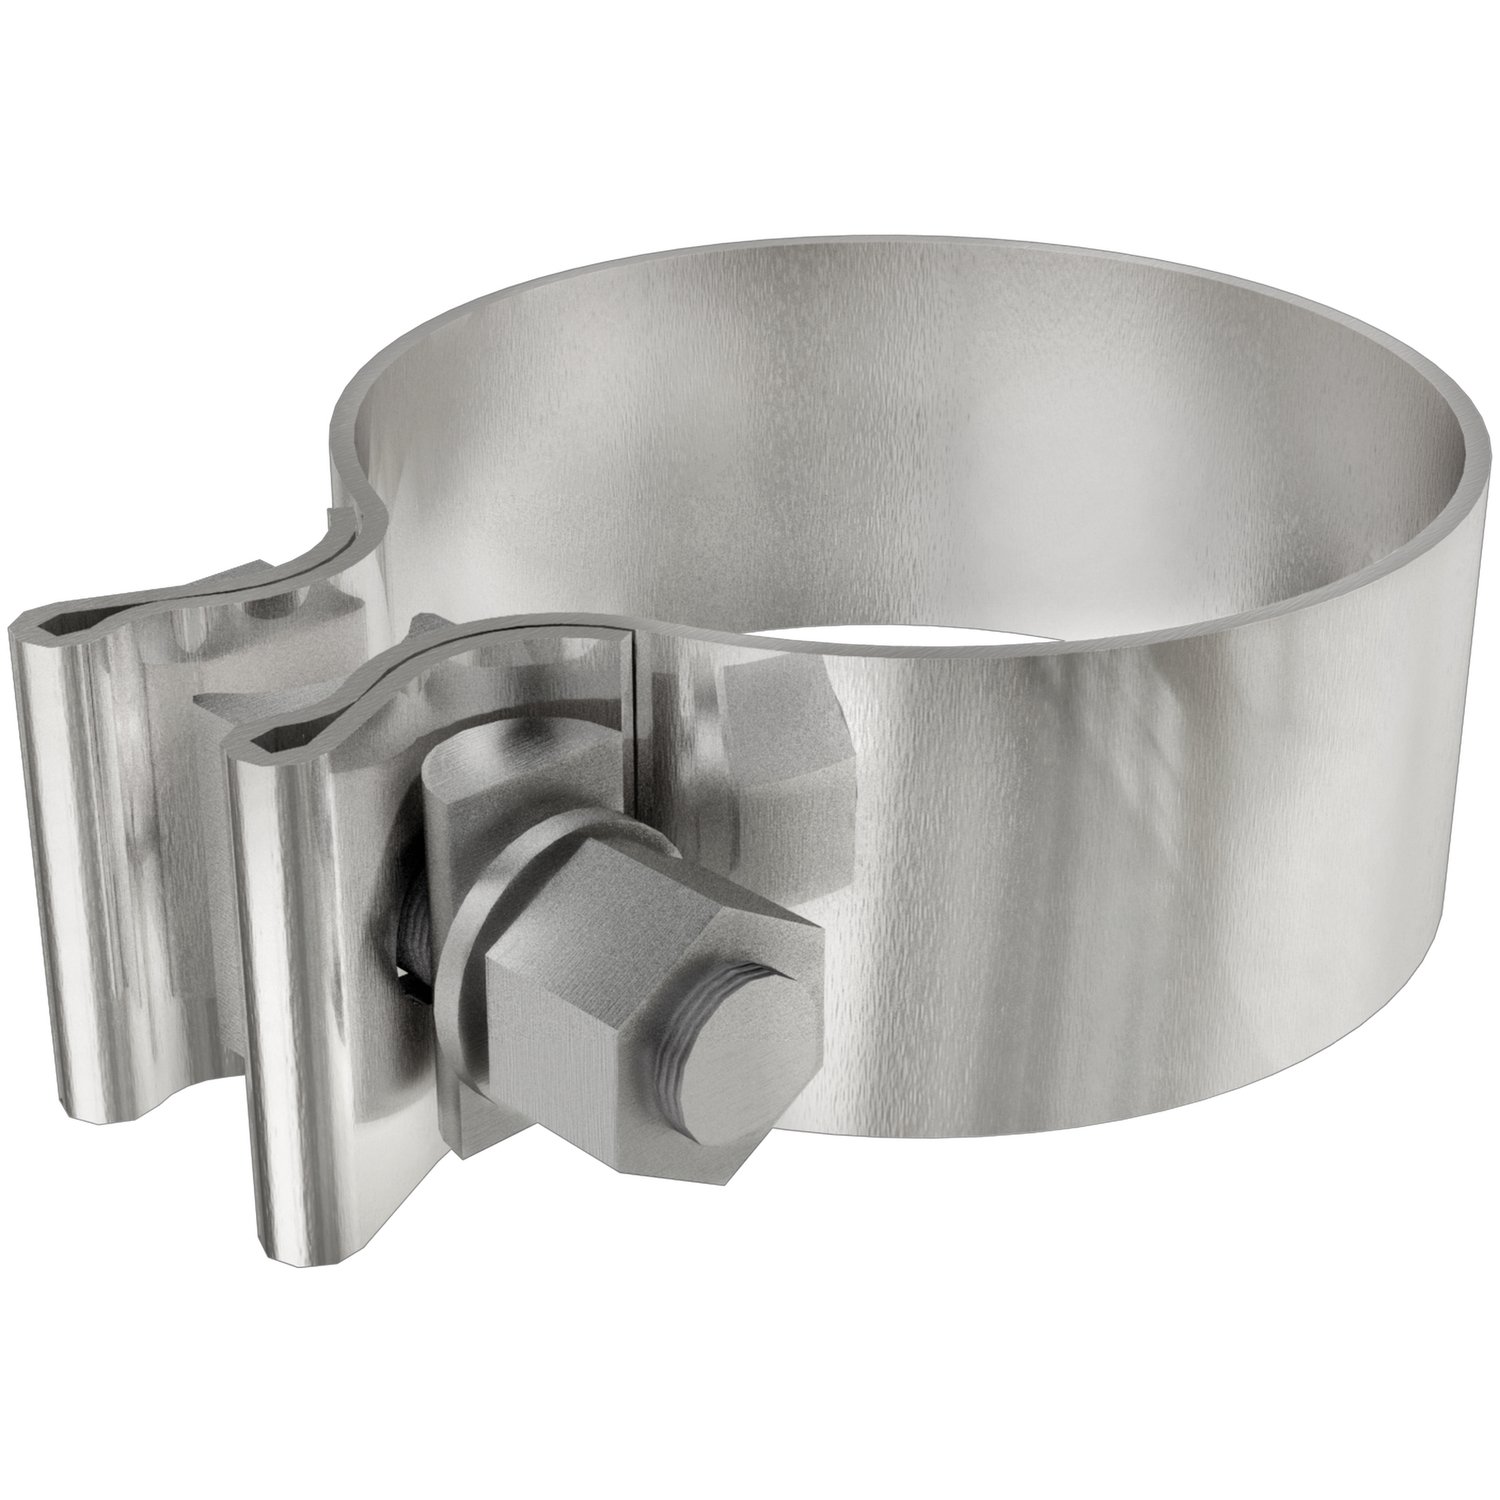 AccuSeal Stainless Steel Exhaust Band Clamps Clamp Diameter: 2.25"